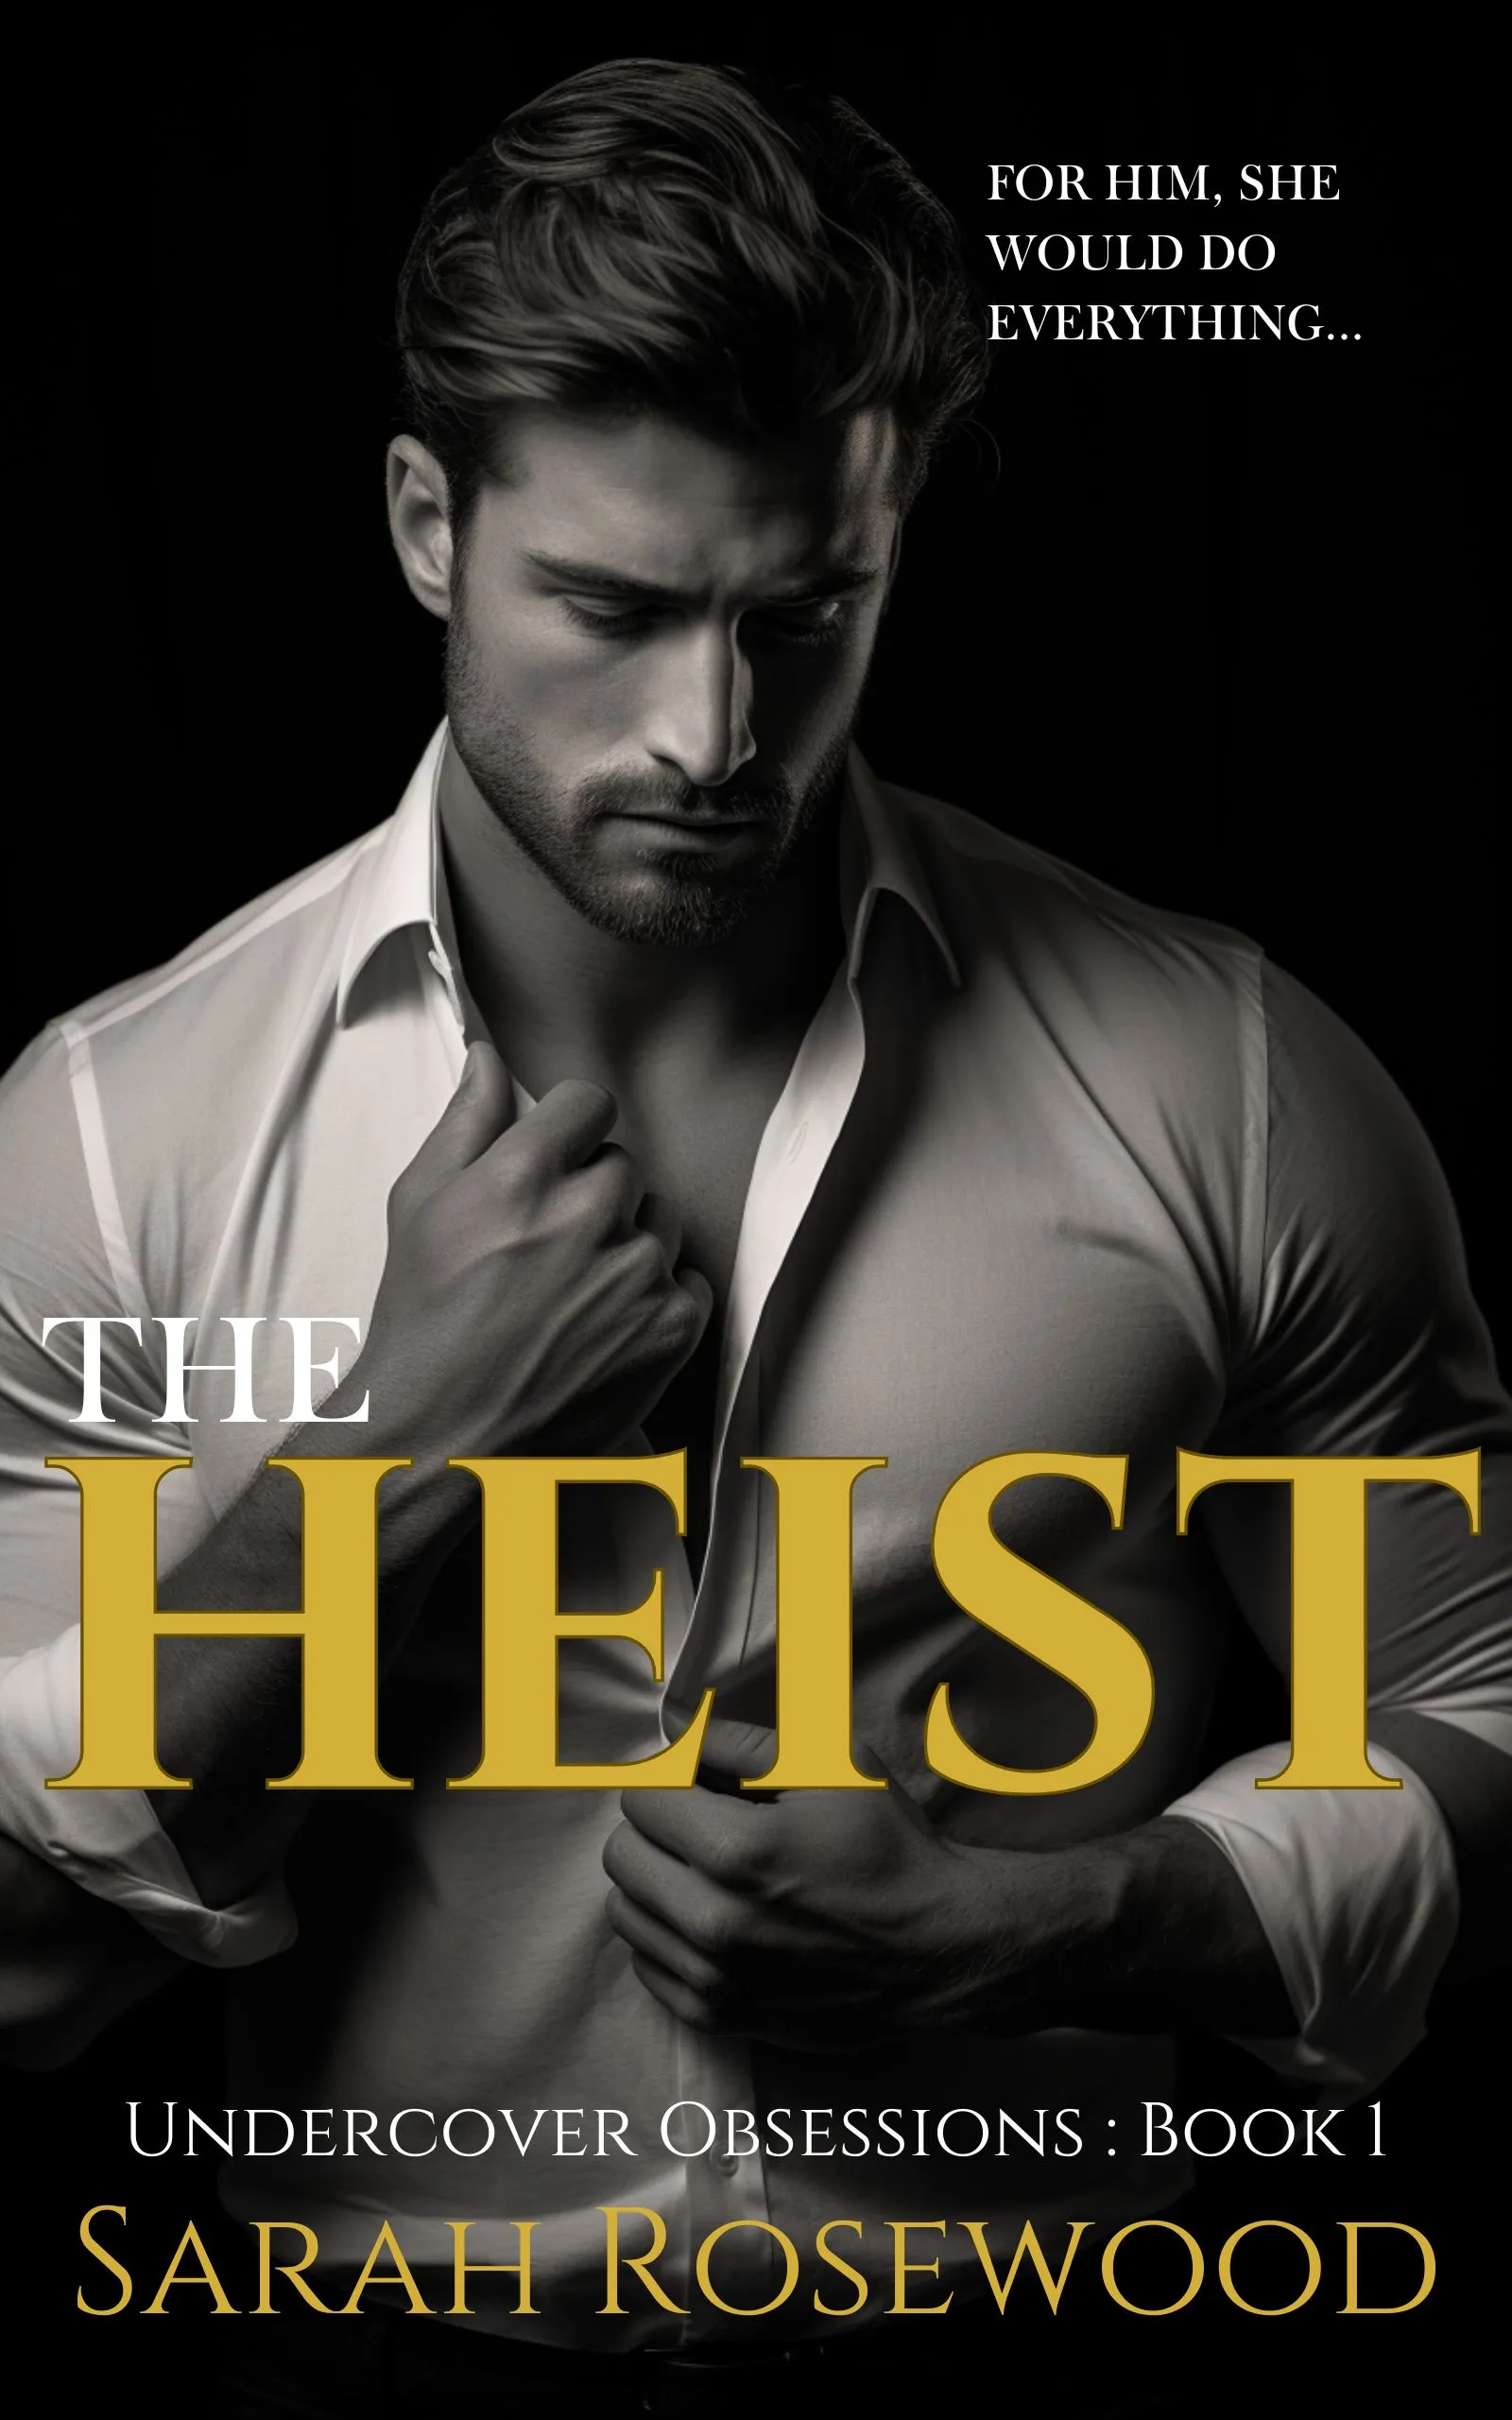 The Heist by Sarah Rosewood